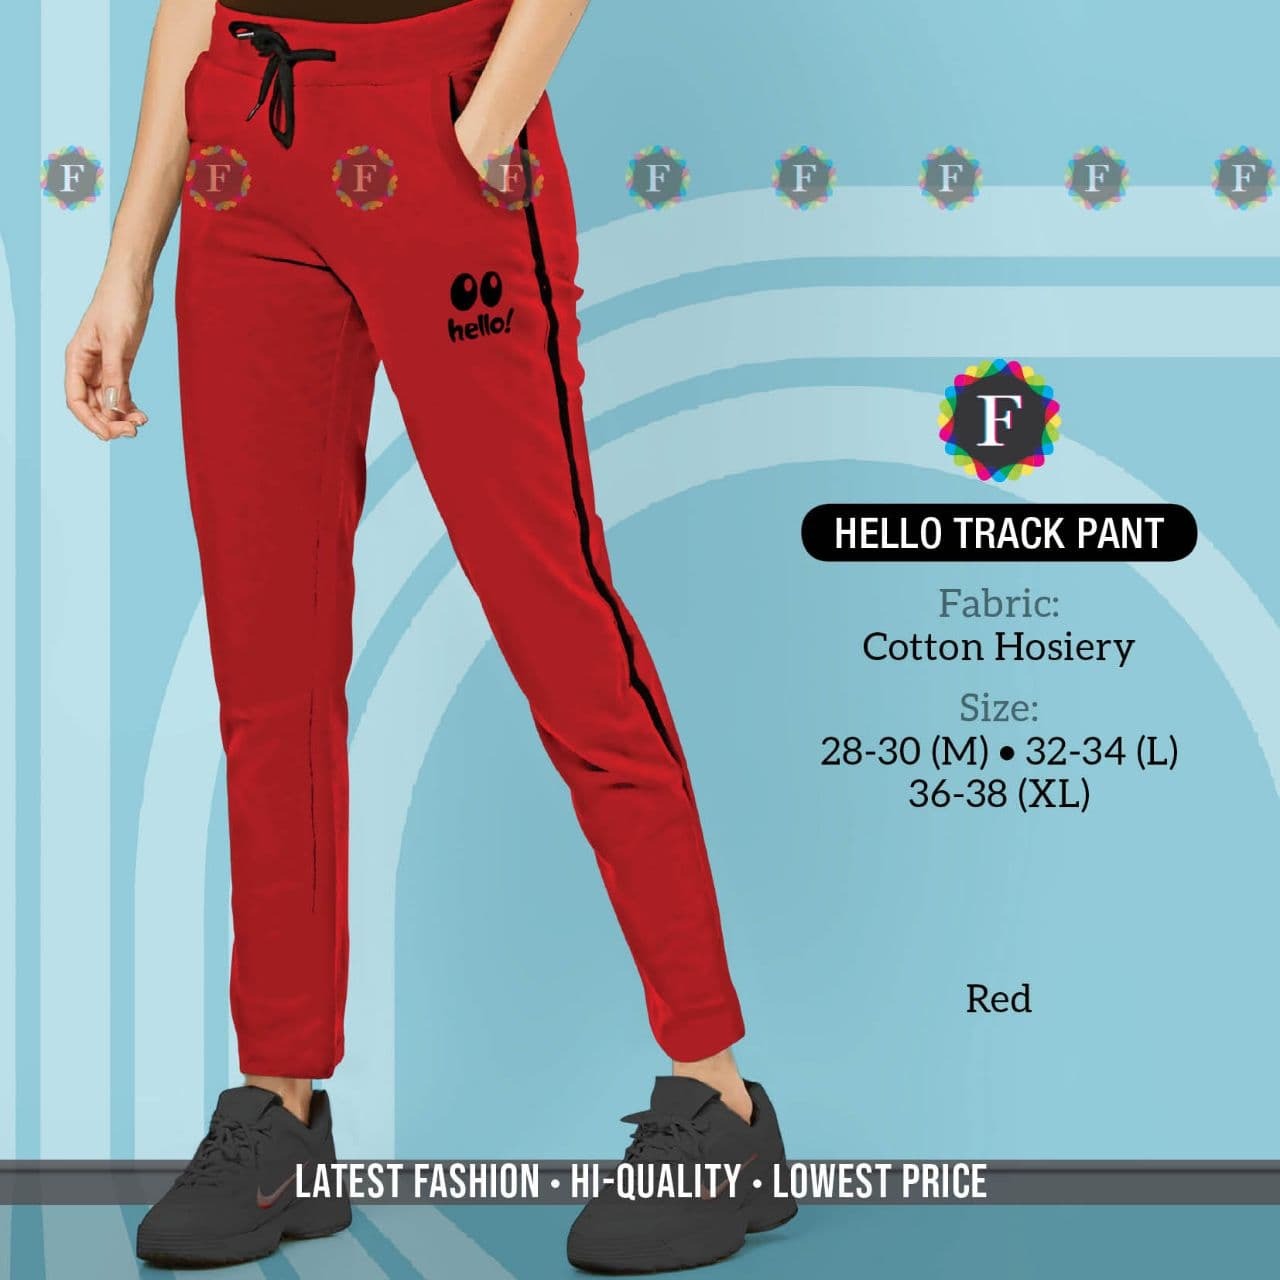 PUMA The Unity Collection Tfs Kid's Track Pants 597831_01 in Pune at best  price by Shree Shyam Hosiery - Justdial